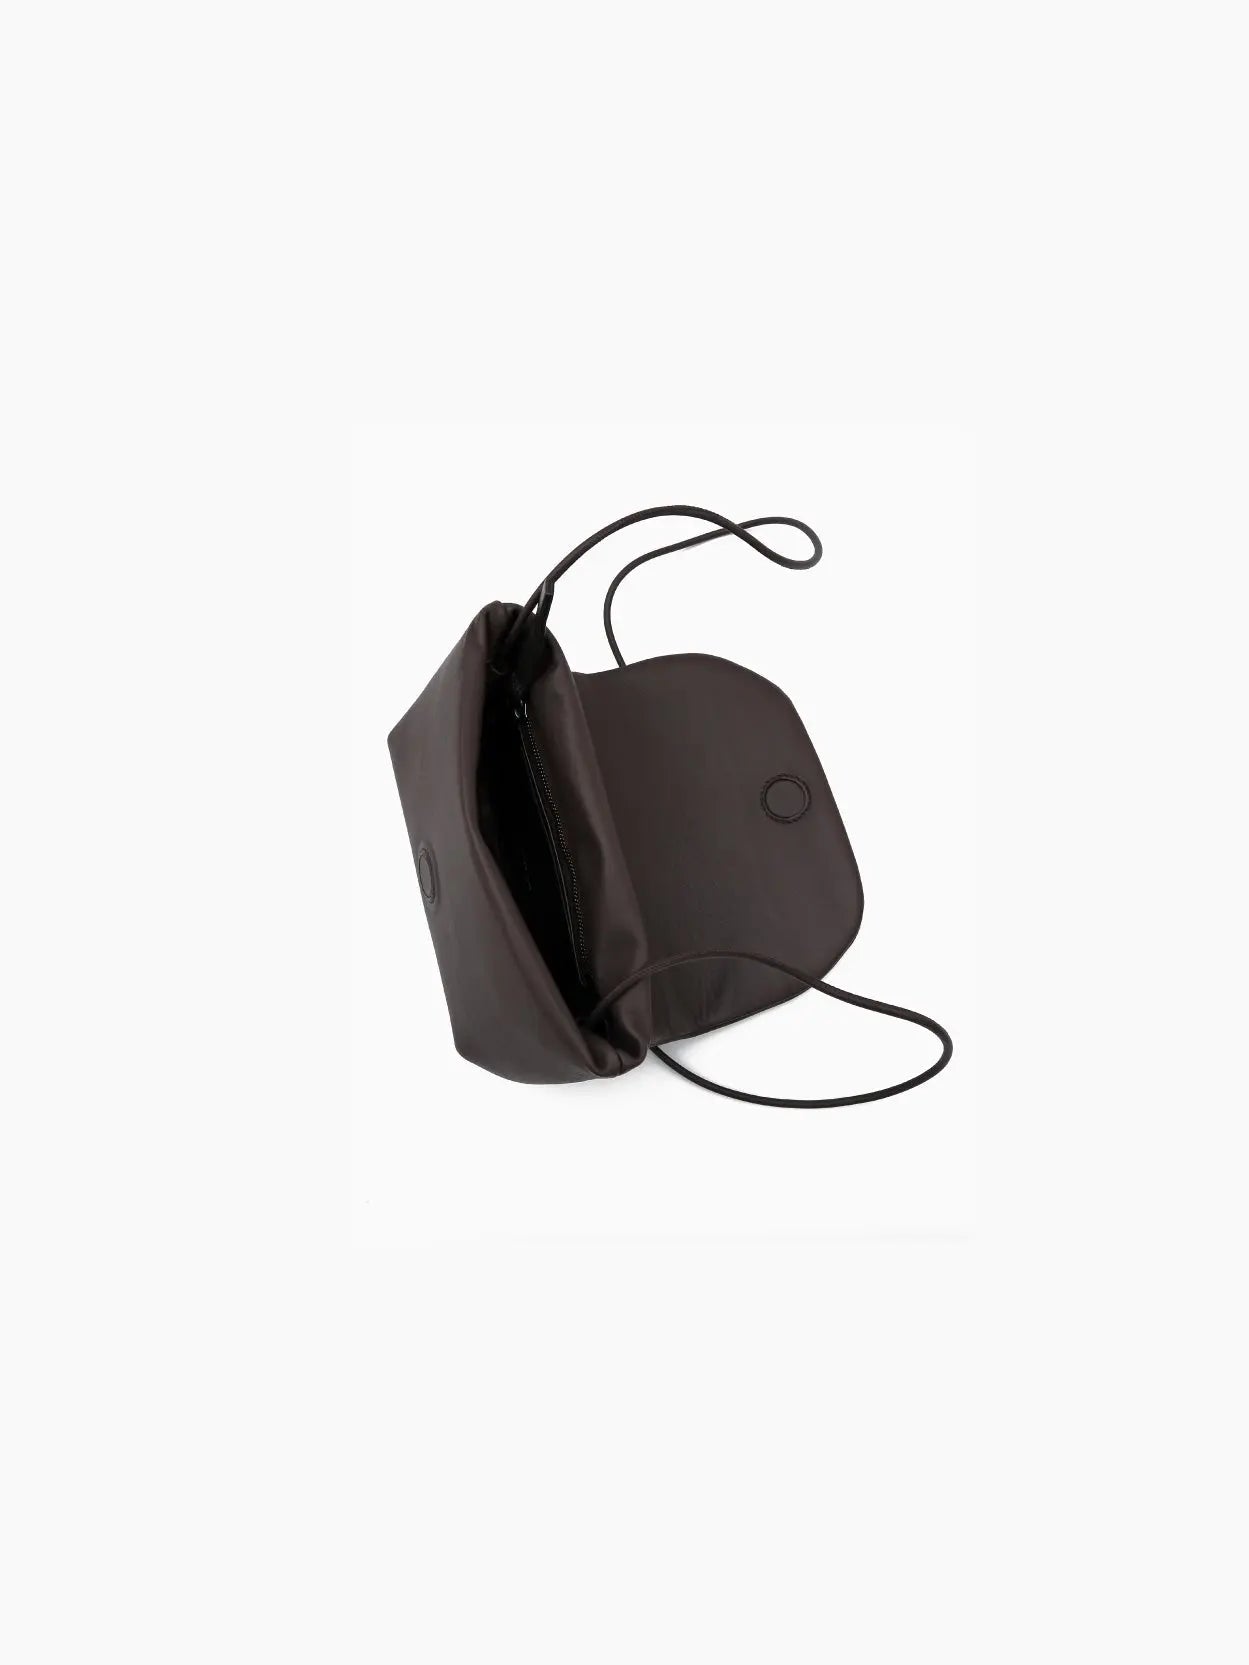 A small, dark brown leather crossbody bag with a curved flap closure. The Anonima Clutch Dark Brown by Marsèll, available at Bassalstore in Barcelona, has a smooth texture and a minimalist design against a plain white background.